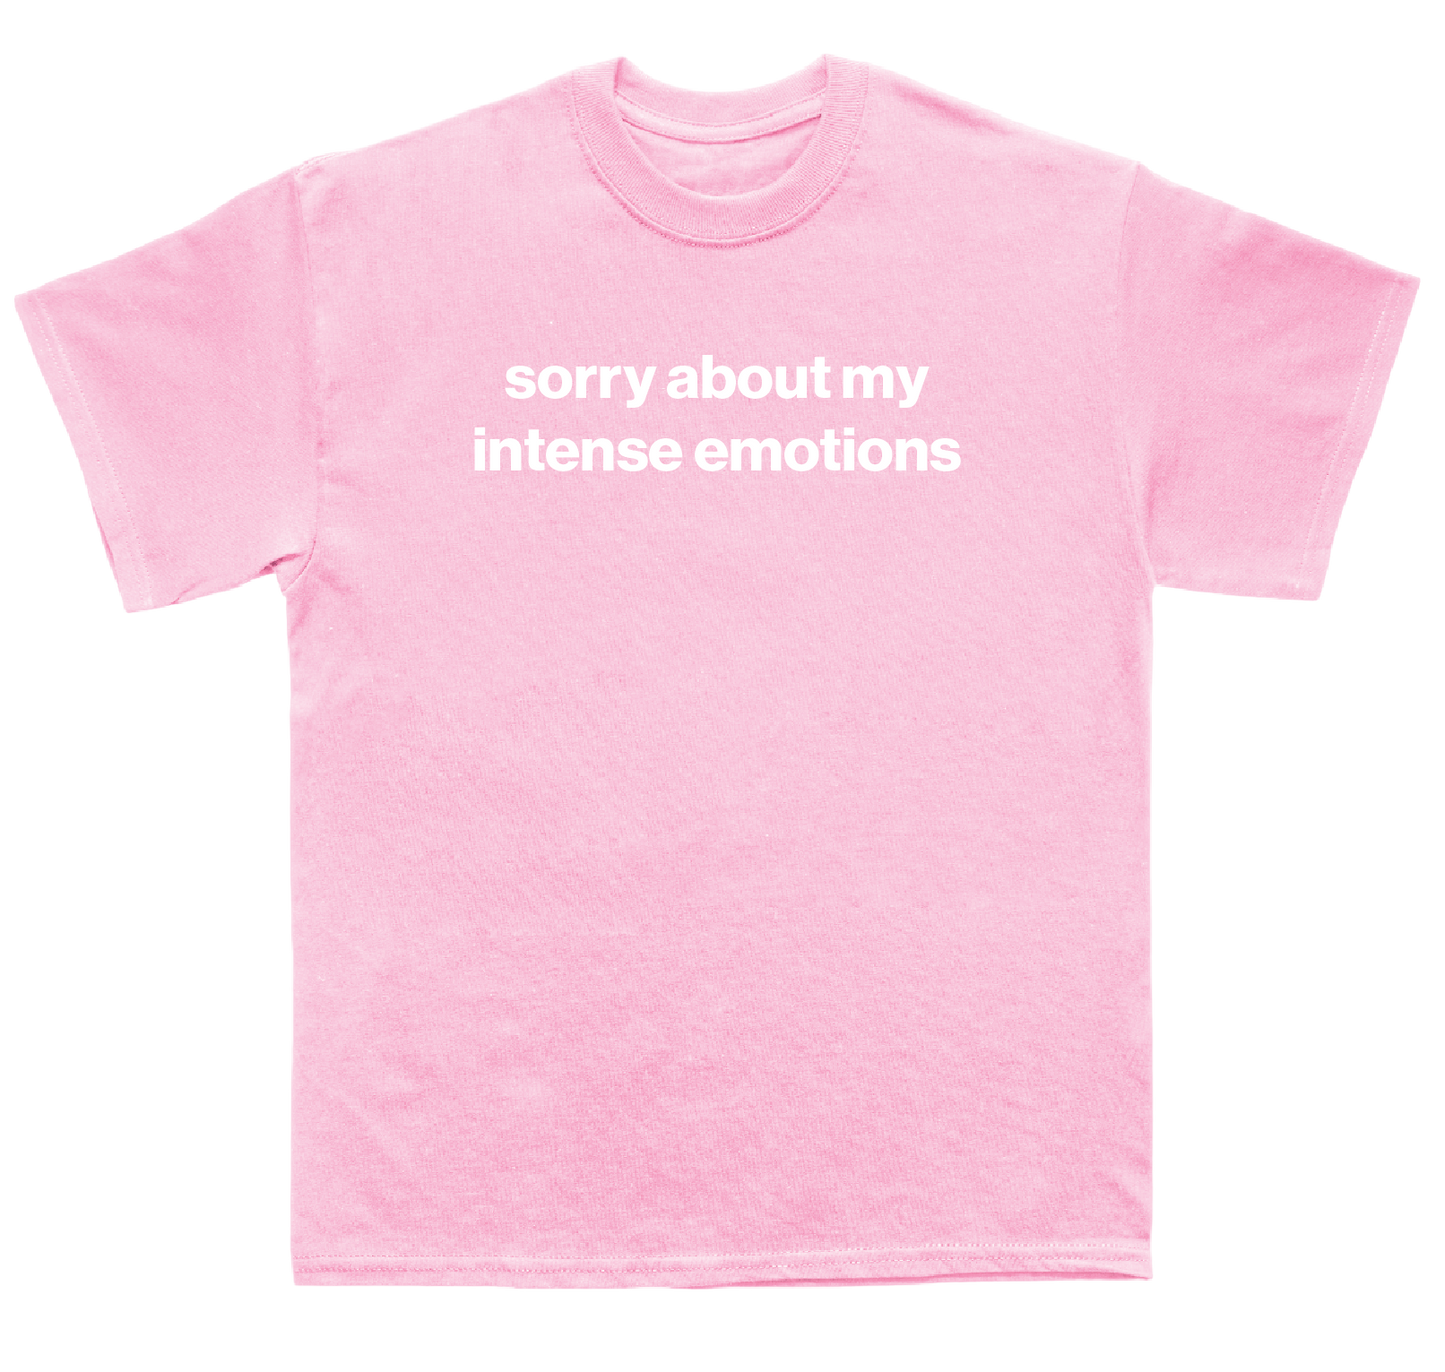 sorry about my intense emotions shirt